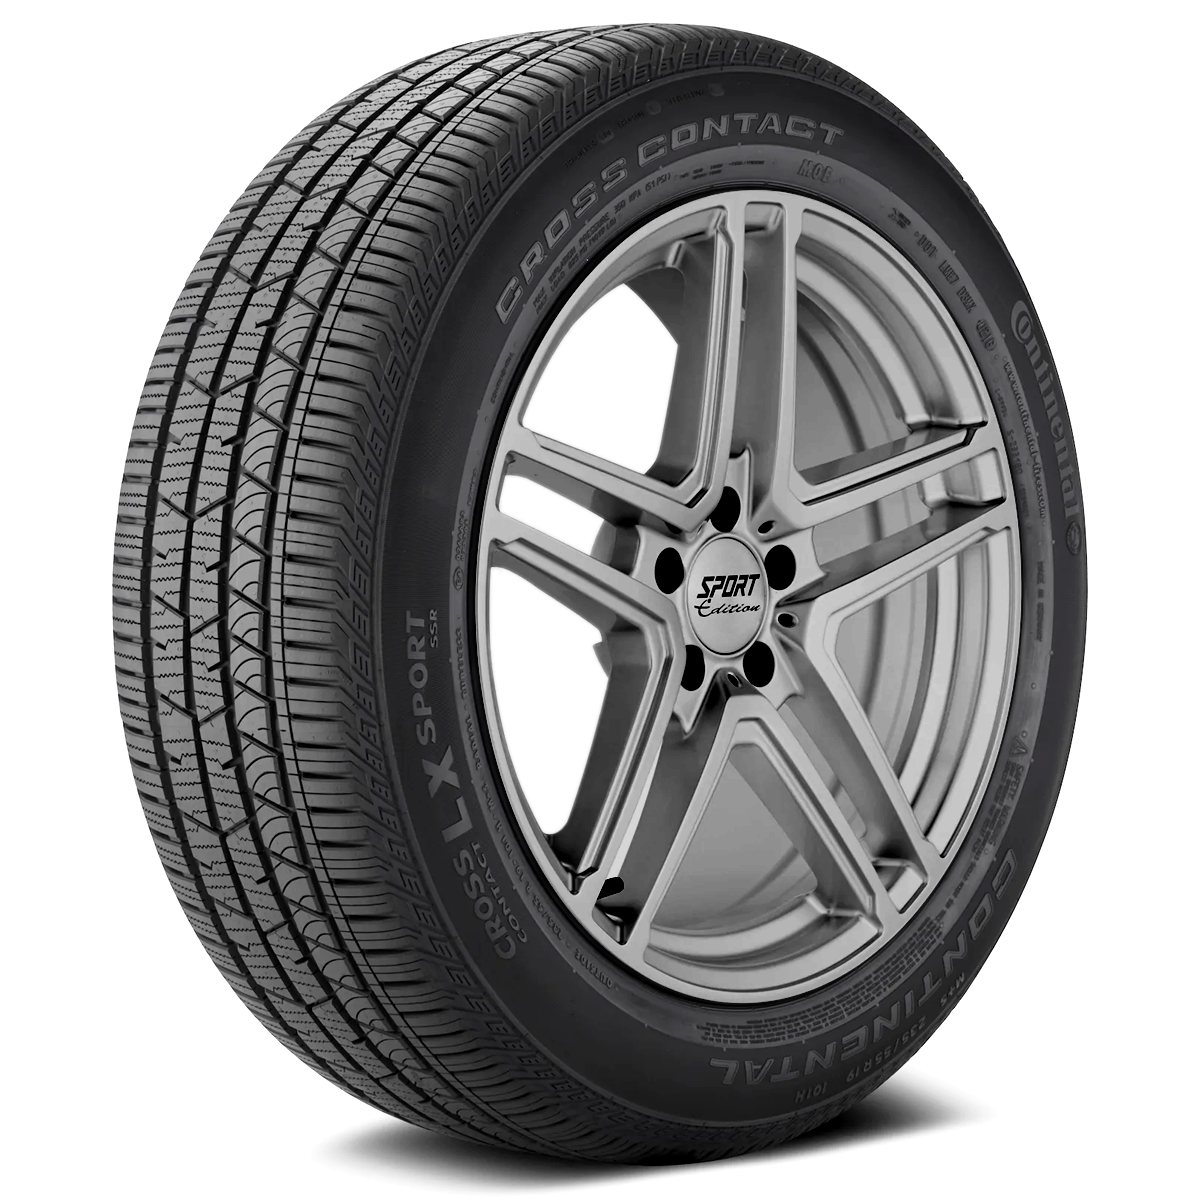 Continental CROSSCONTACT LX. Continental CROSSCONTACT LX Sport 255/55r19. Continental CROSSCONTACT LX 2.